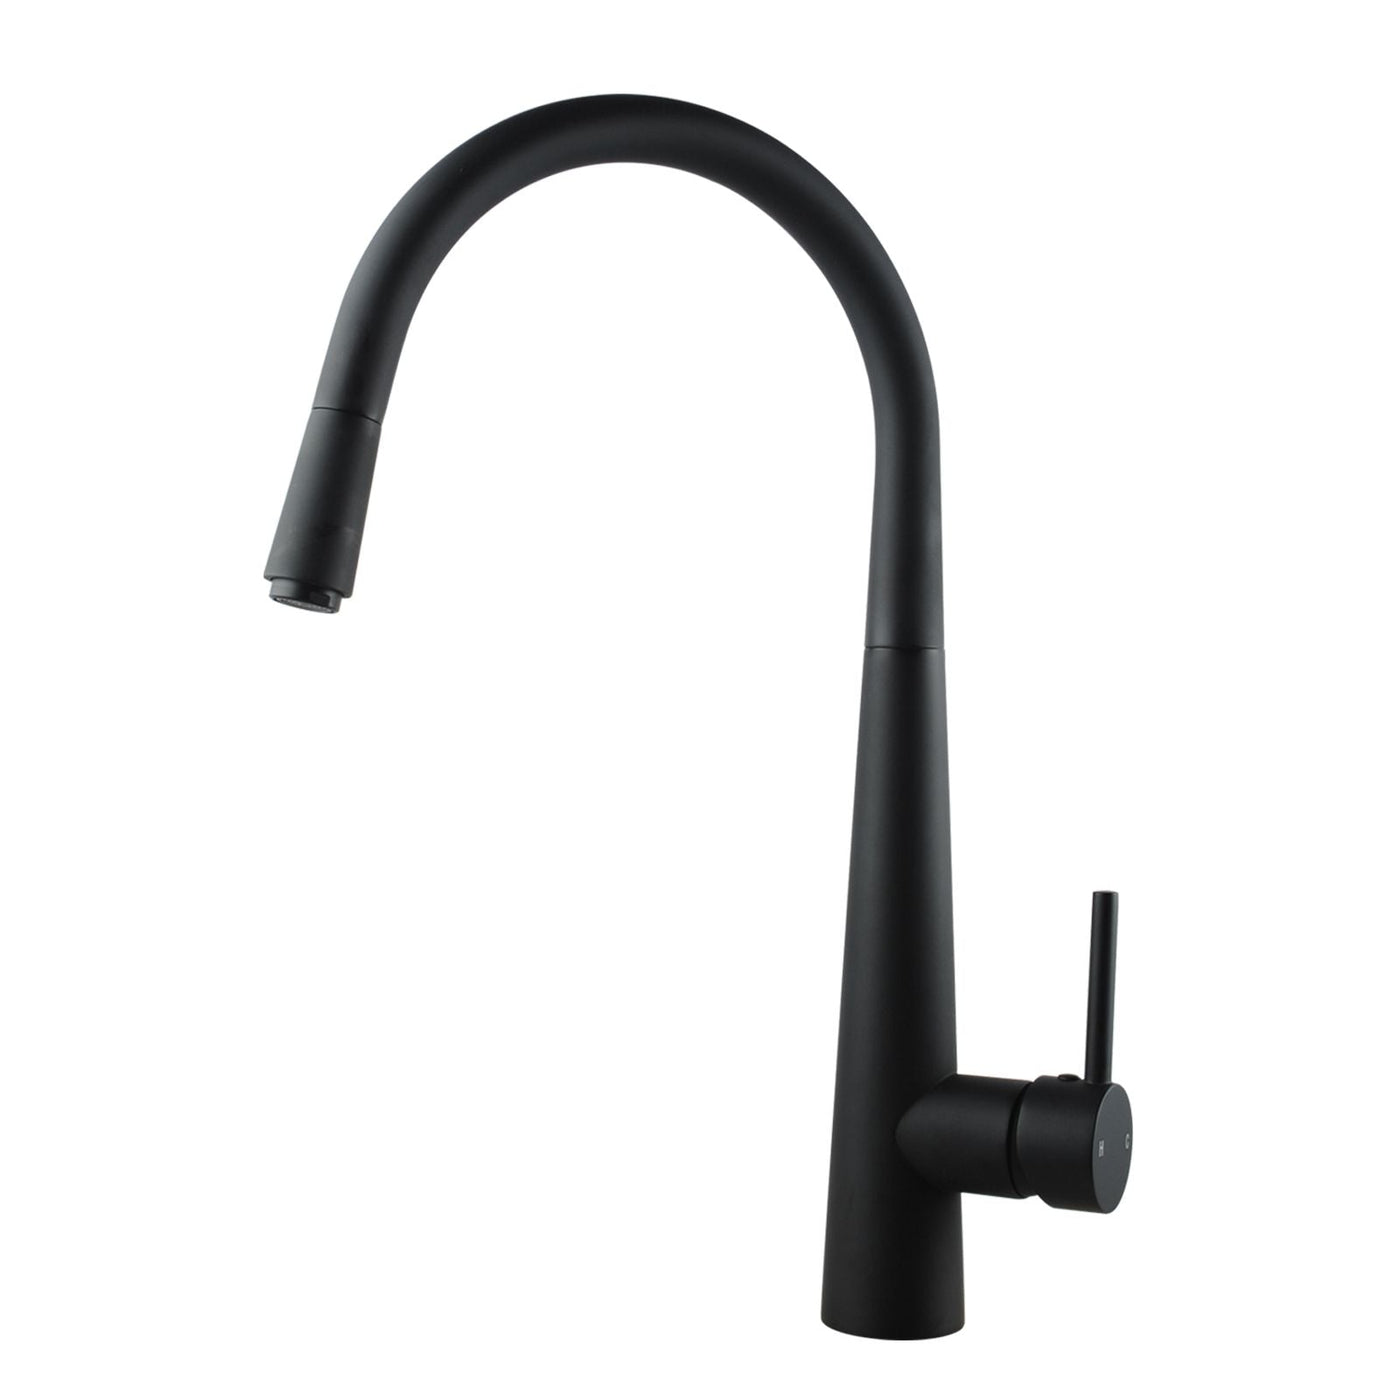 Round Black 360° Swivel Pull Out Kitchen Sink Mixer Tap